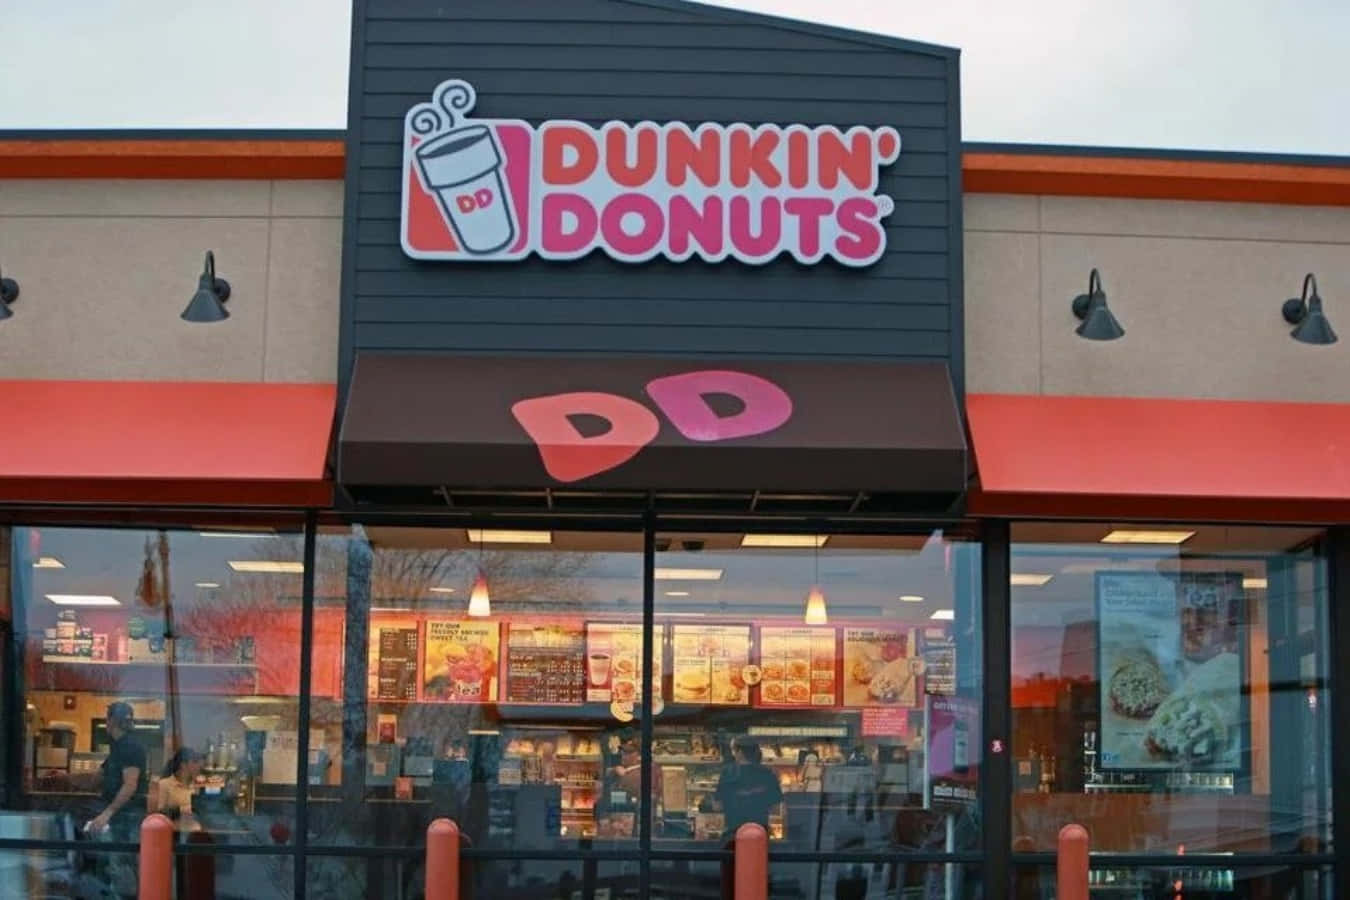 Enjoy the deliciousness of Dunkin Donuts